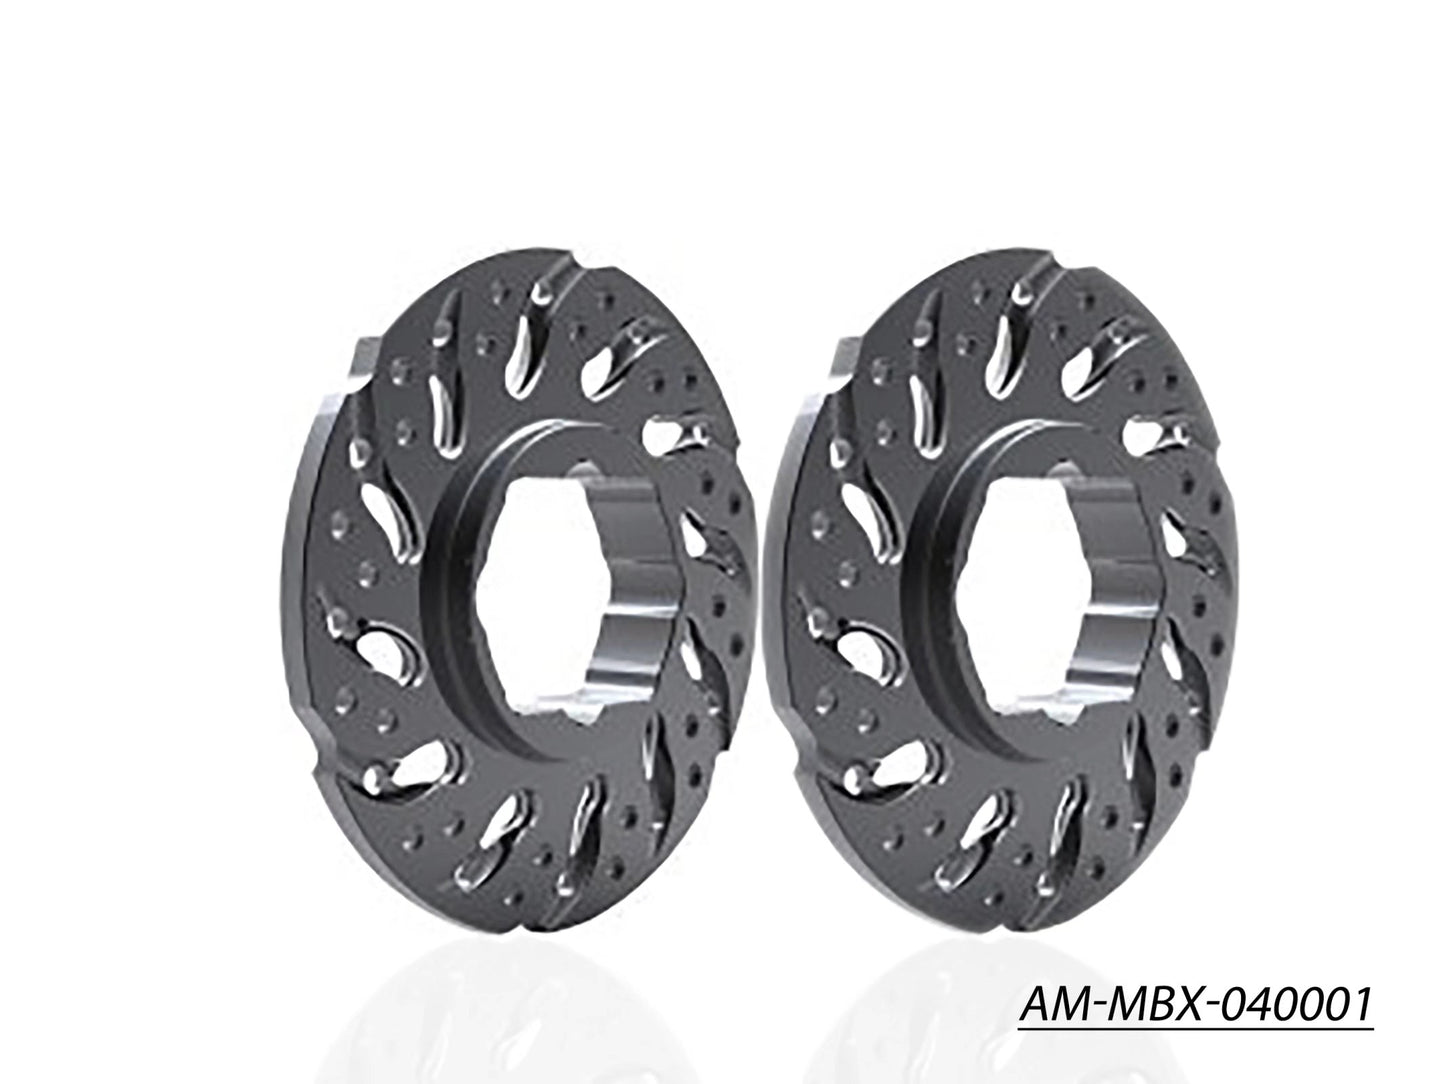 Lightweight Ventilated Brake Disc For MBX6 (Steel)?2? (AM-MBX-040001)